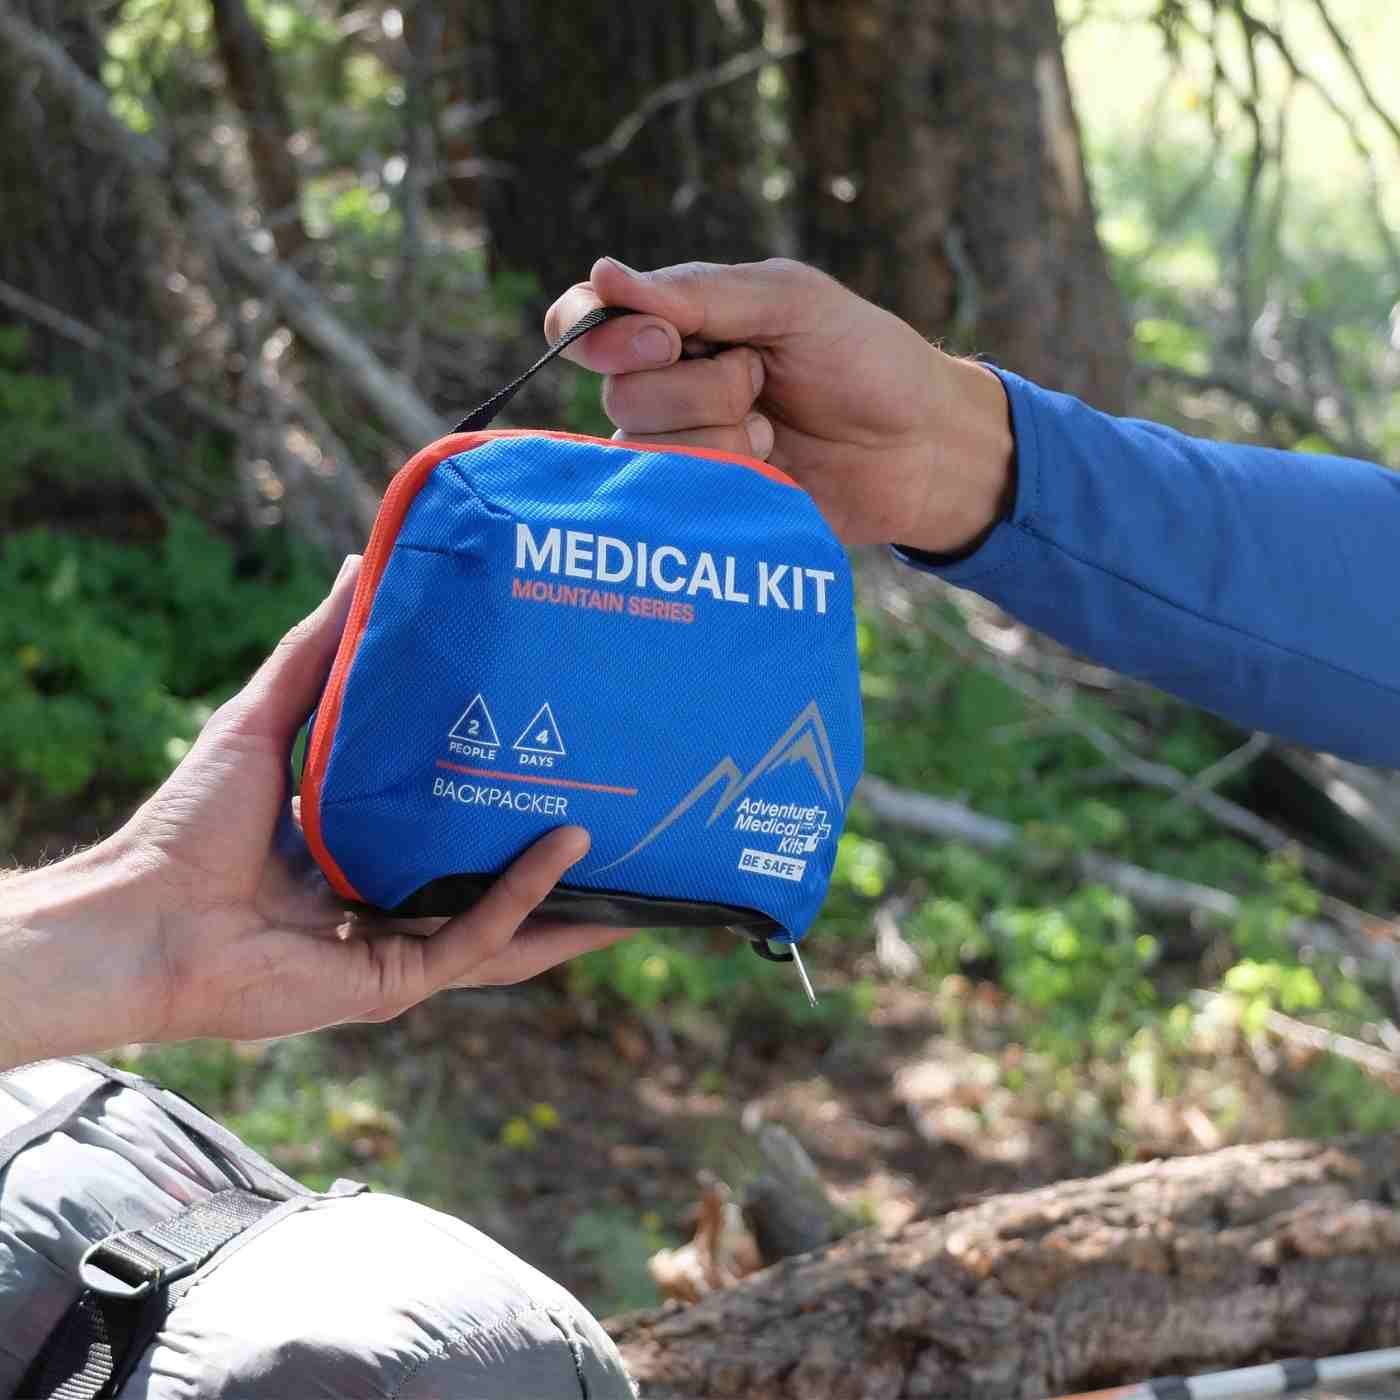 Mountain Series Medical Kit - Backpacker passing to a friend